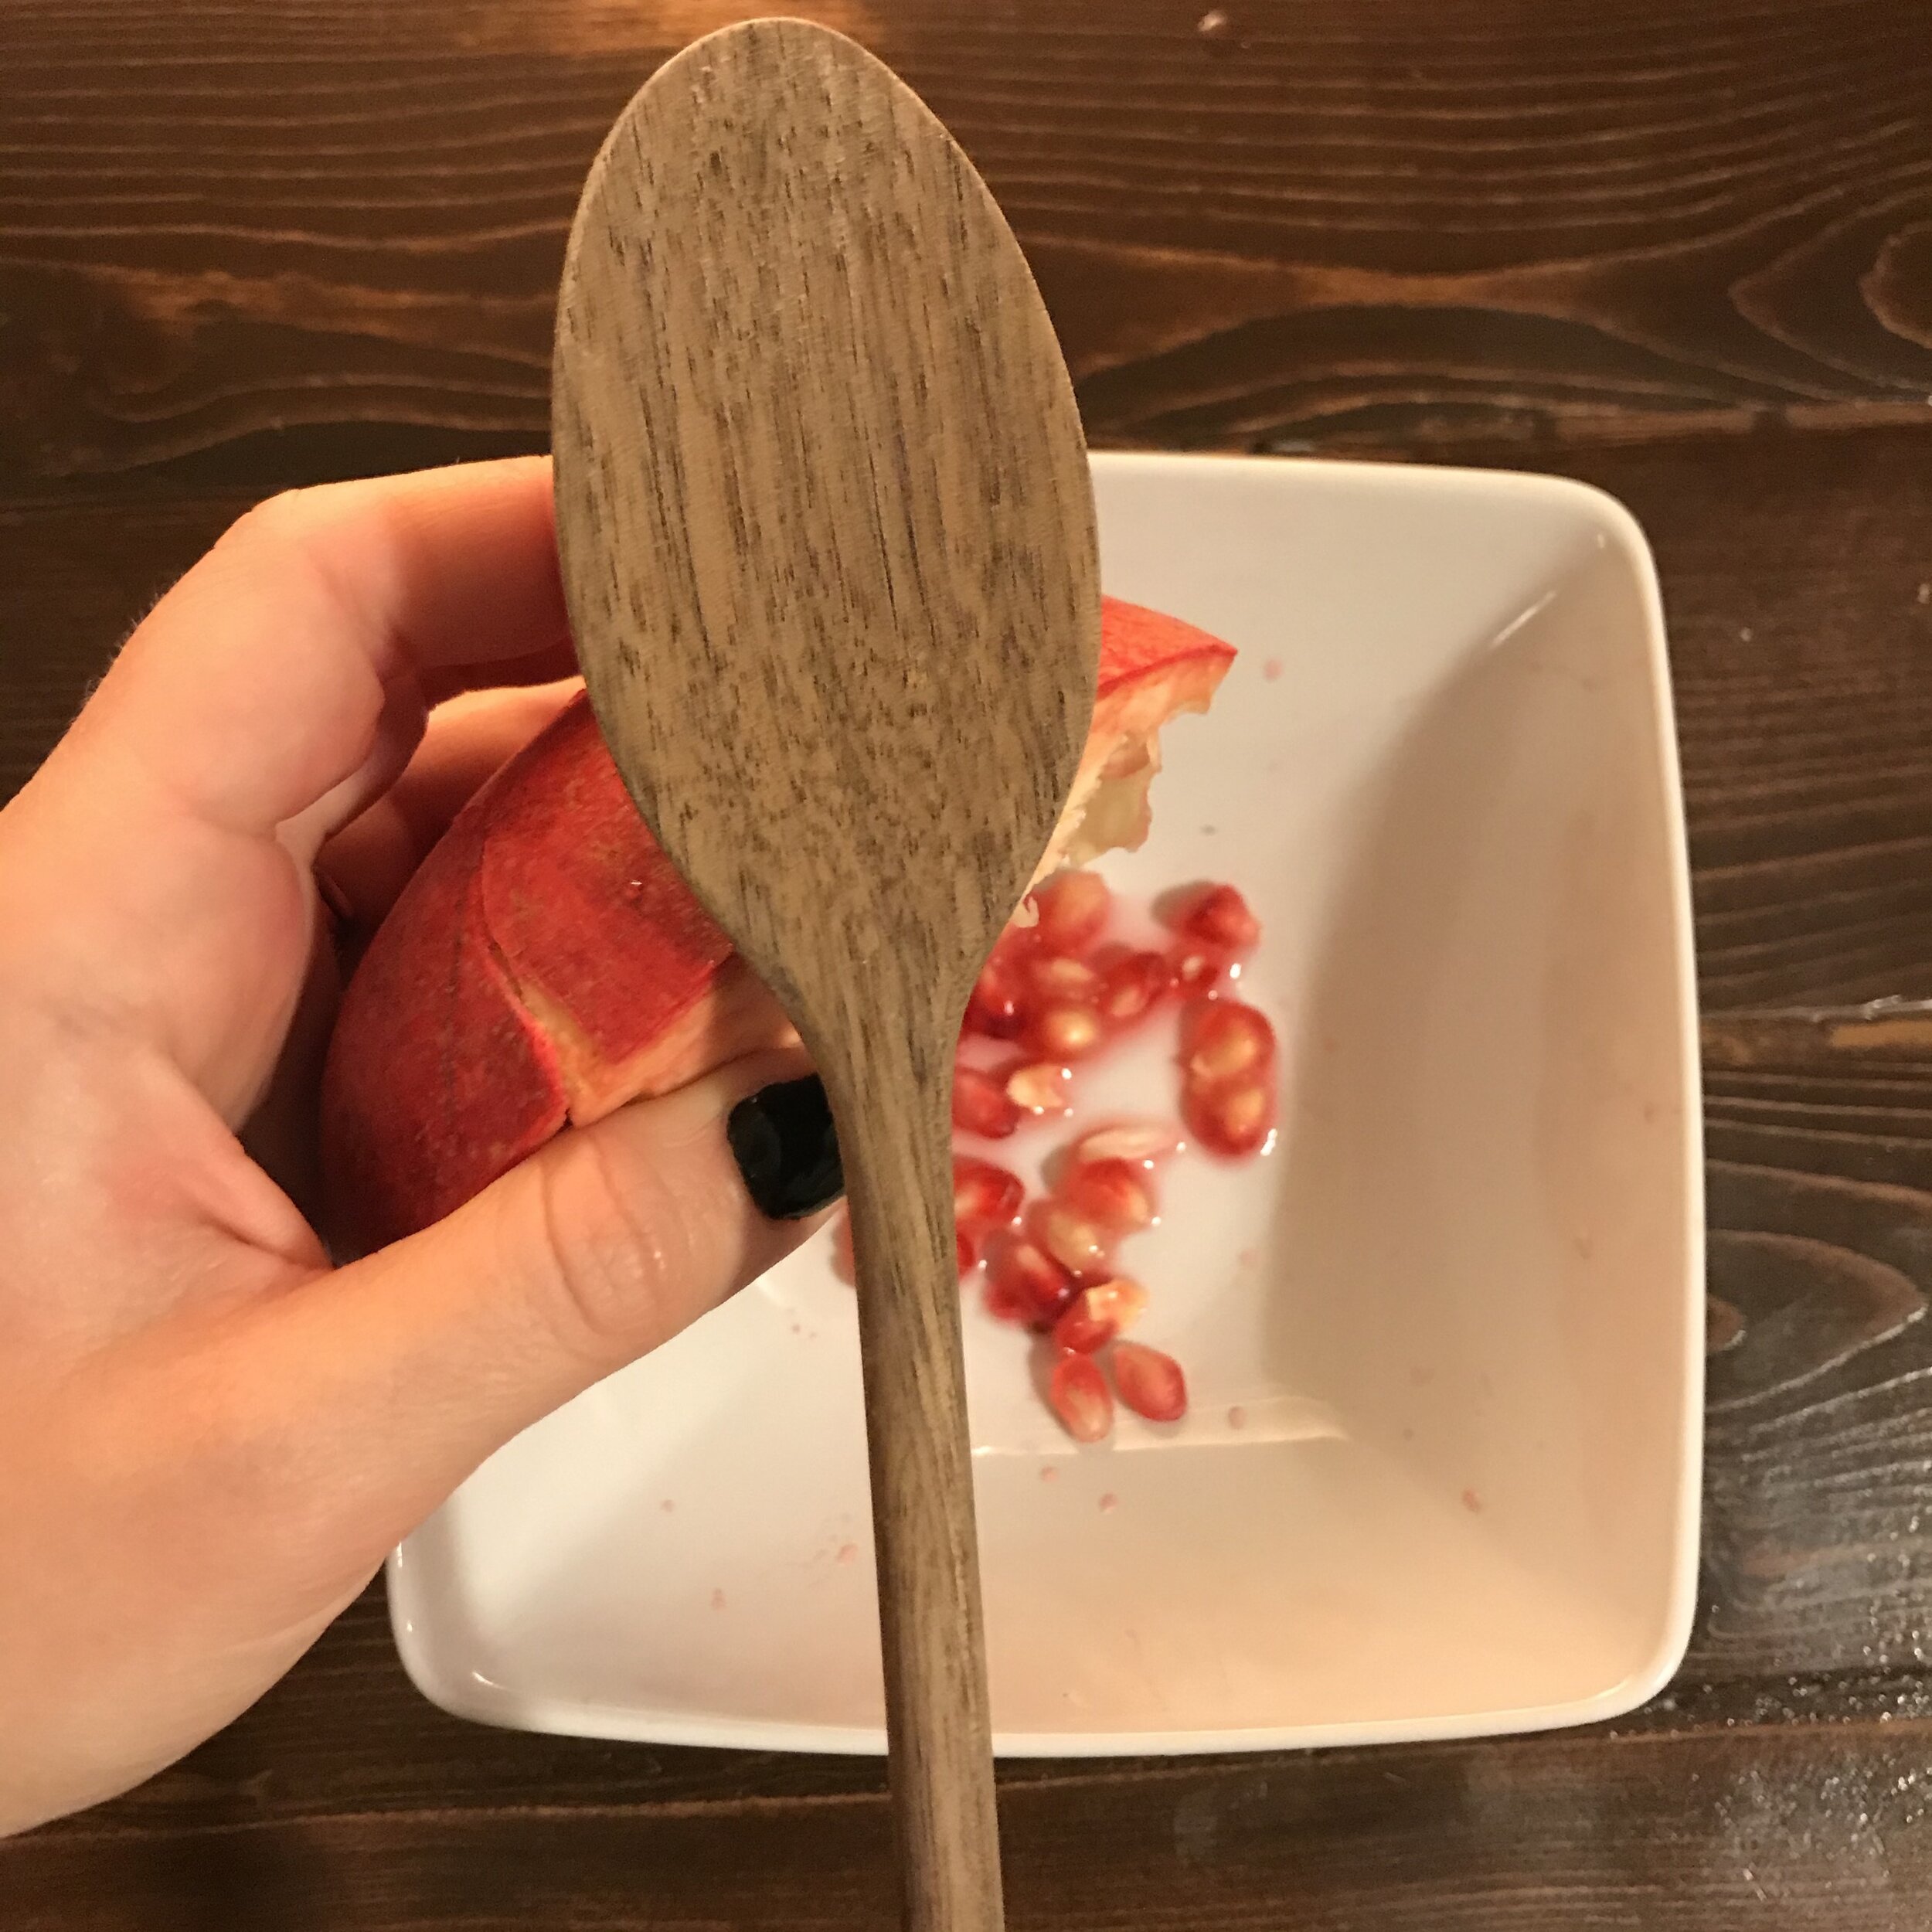 Hit the back with spoon to remove seeds